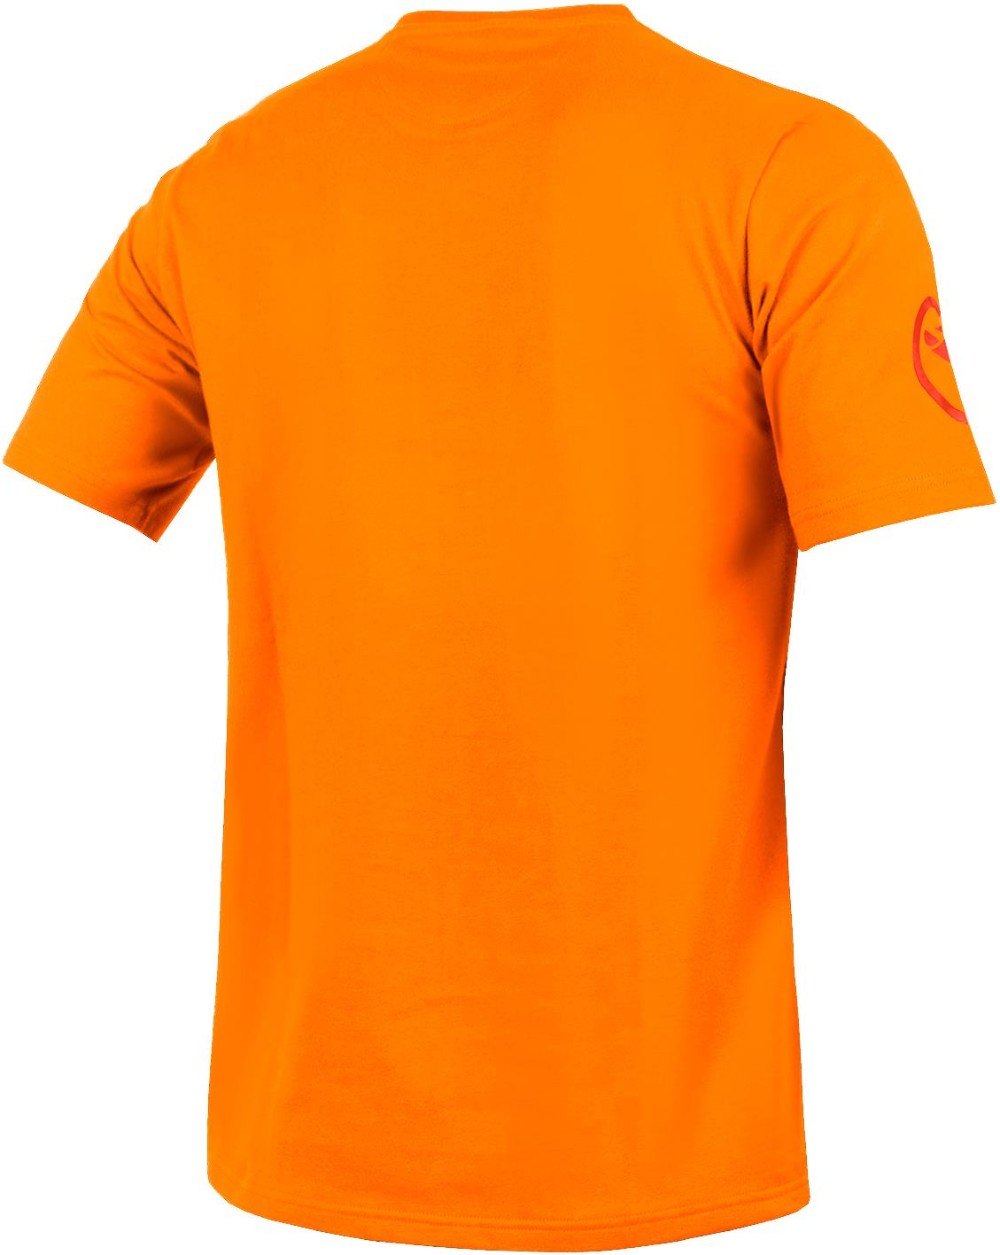 One Clan Carbon Short Sleeve Cycling Tee image 1